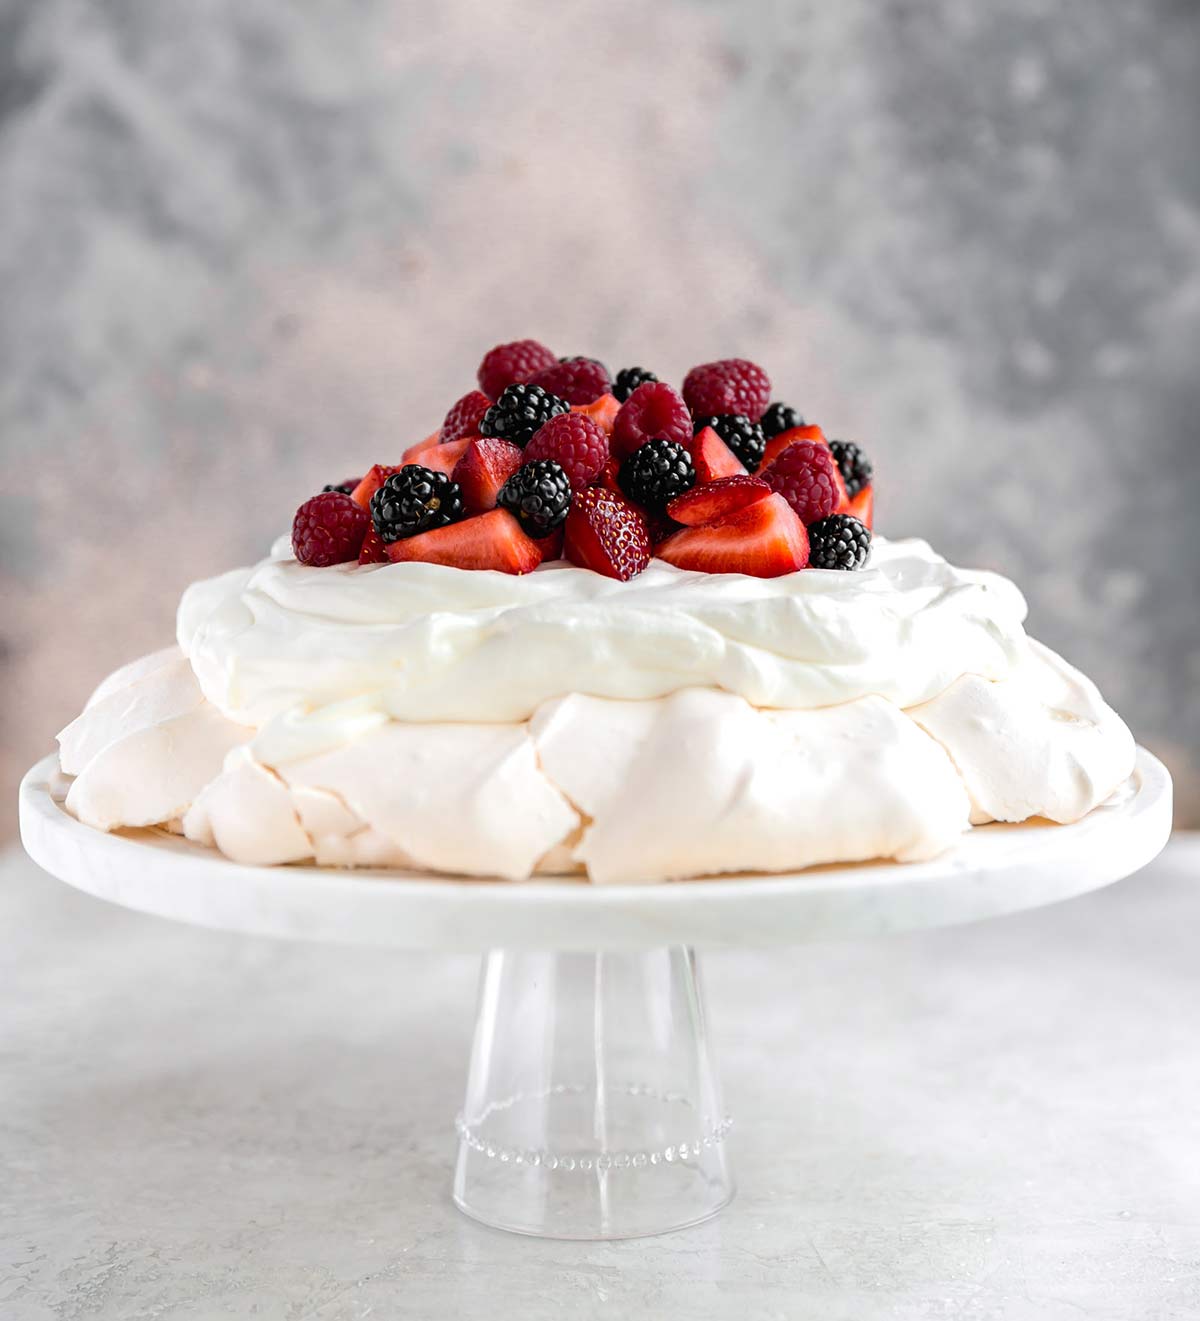 A side view of this classic Pavlova recipe served on a glass cake stand with whipped cream and berries.